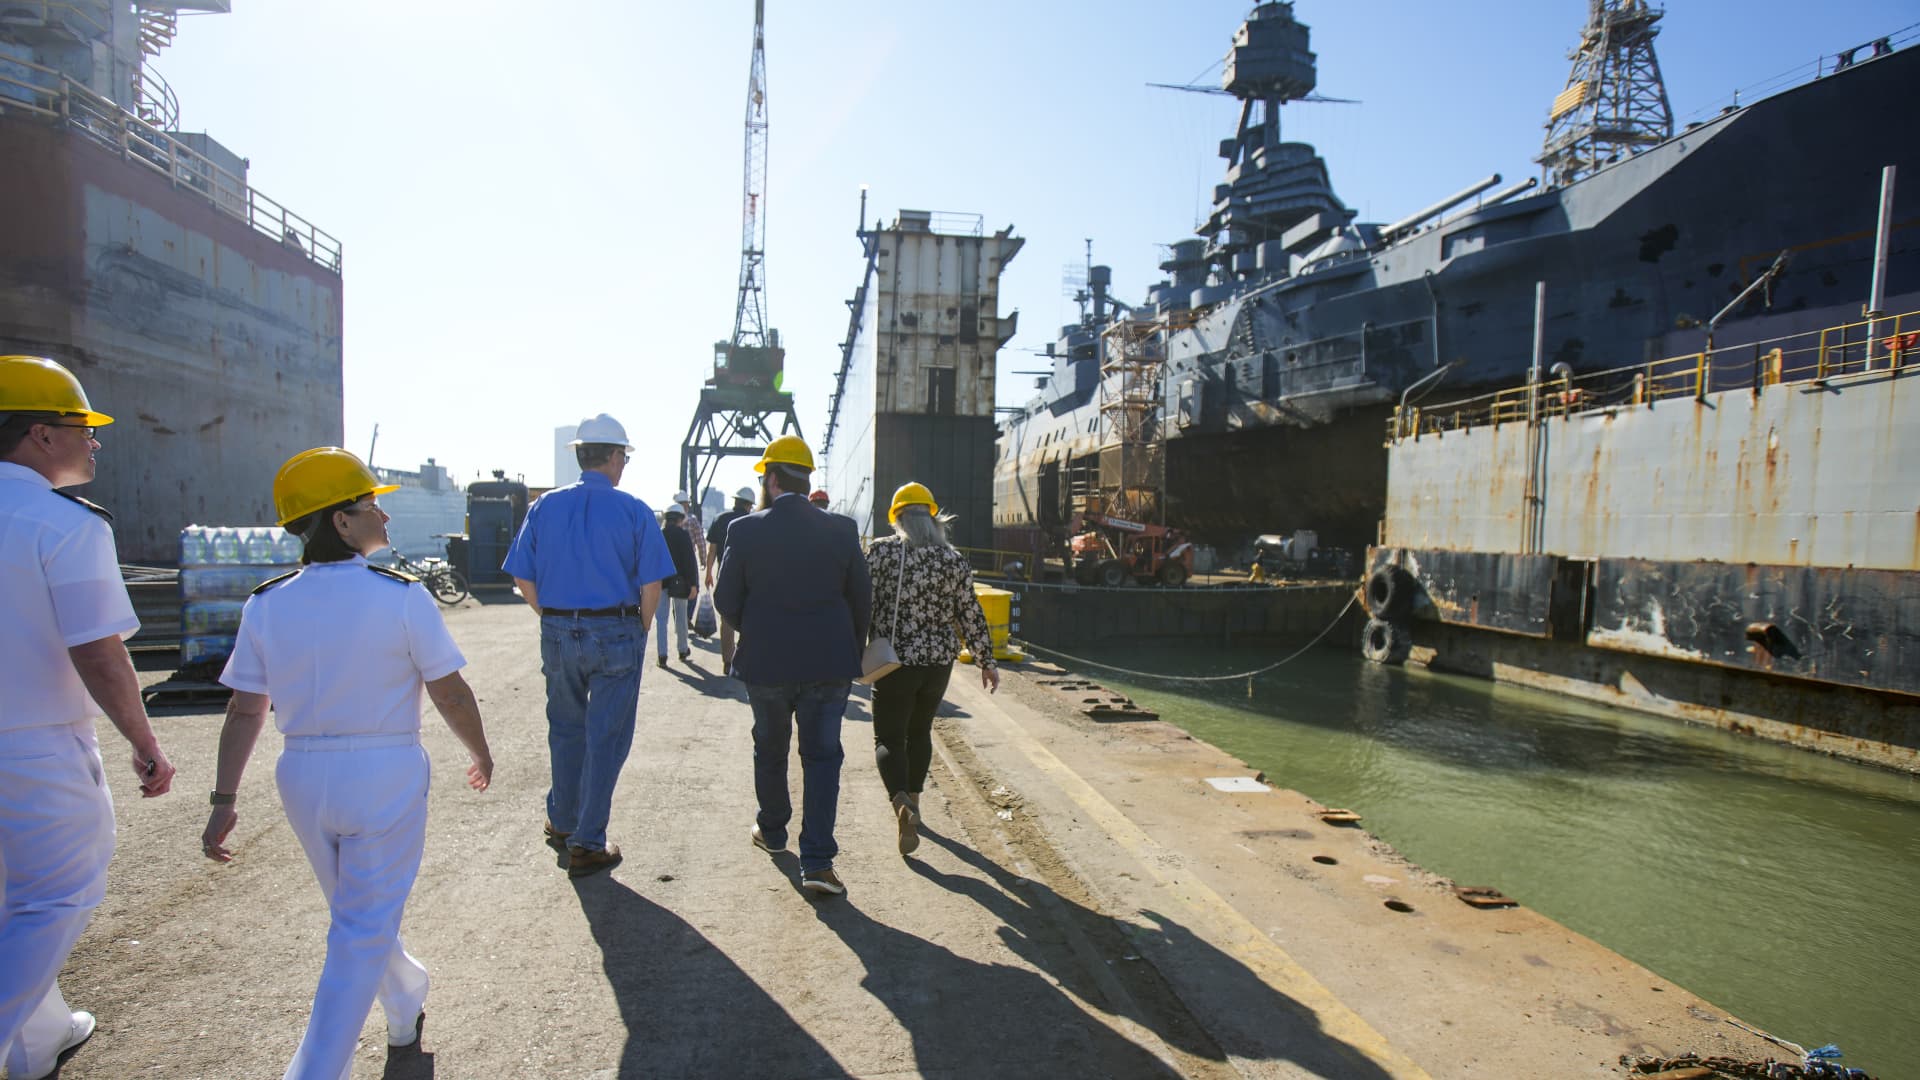 Rear Adm. Jennifer Couture, Commander Naval Service Training Command, left, visits Battleship Texas in its dry dock and Gulf Copper as part of Navy Week Houston on Thursday, Oct. 27, 2022 in Galveston.